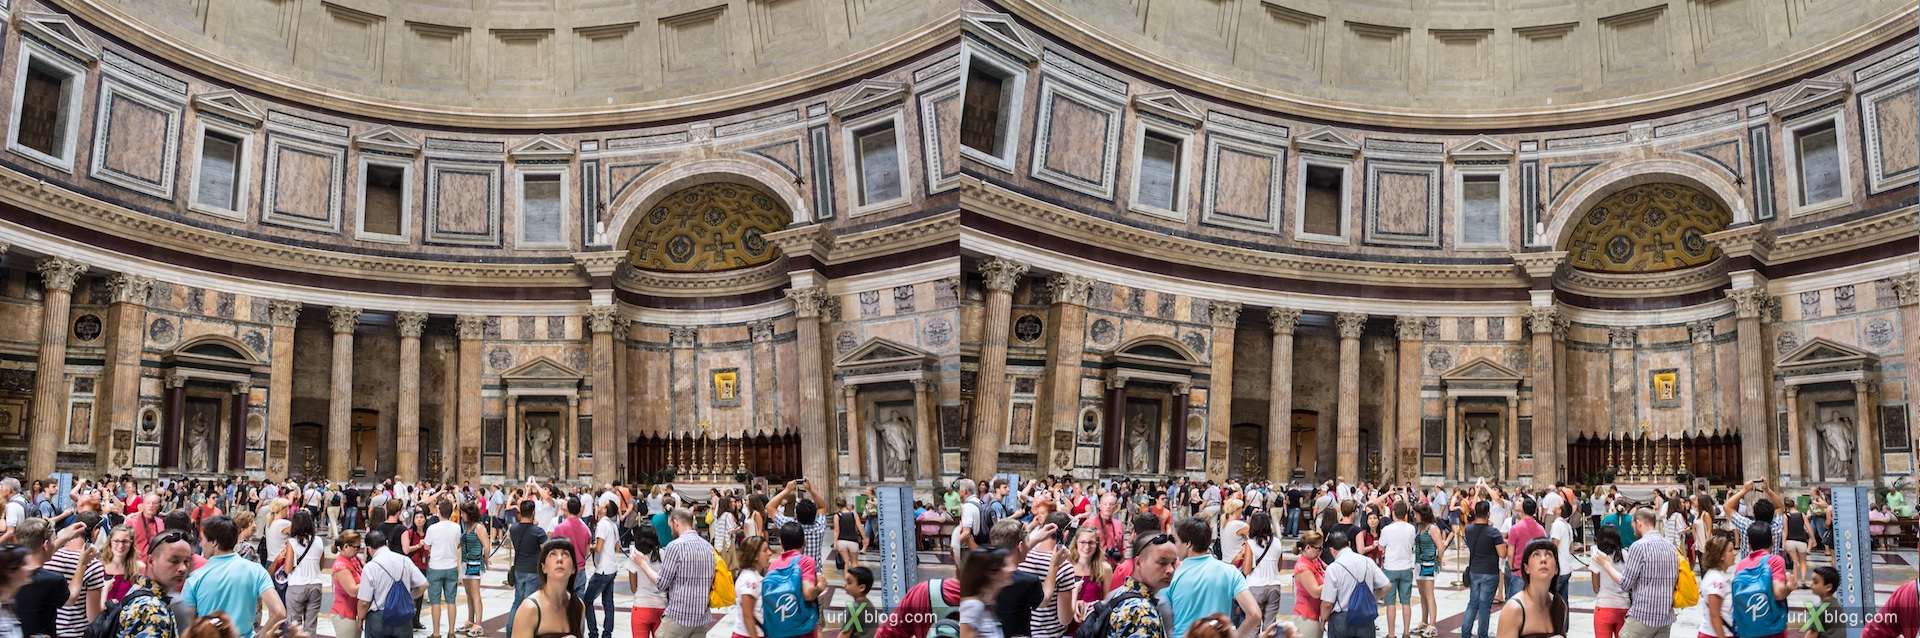 2012, Pantheon, Rome, Italy, 3D, stereo pair, cross-eyed, crossview, cross view stereo pair